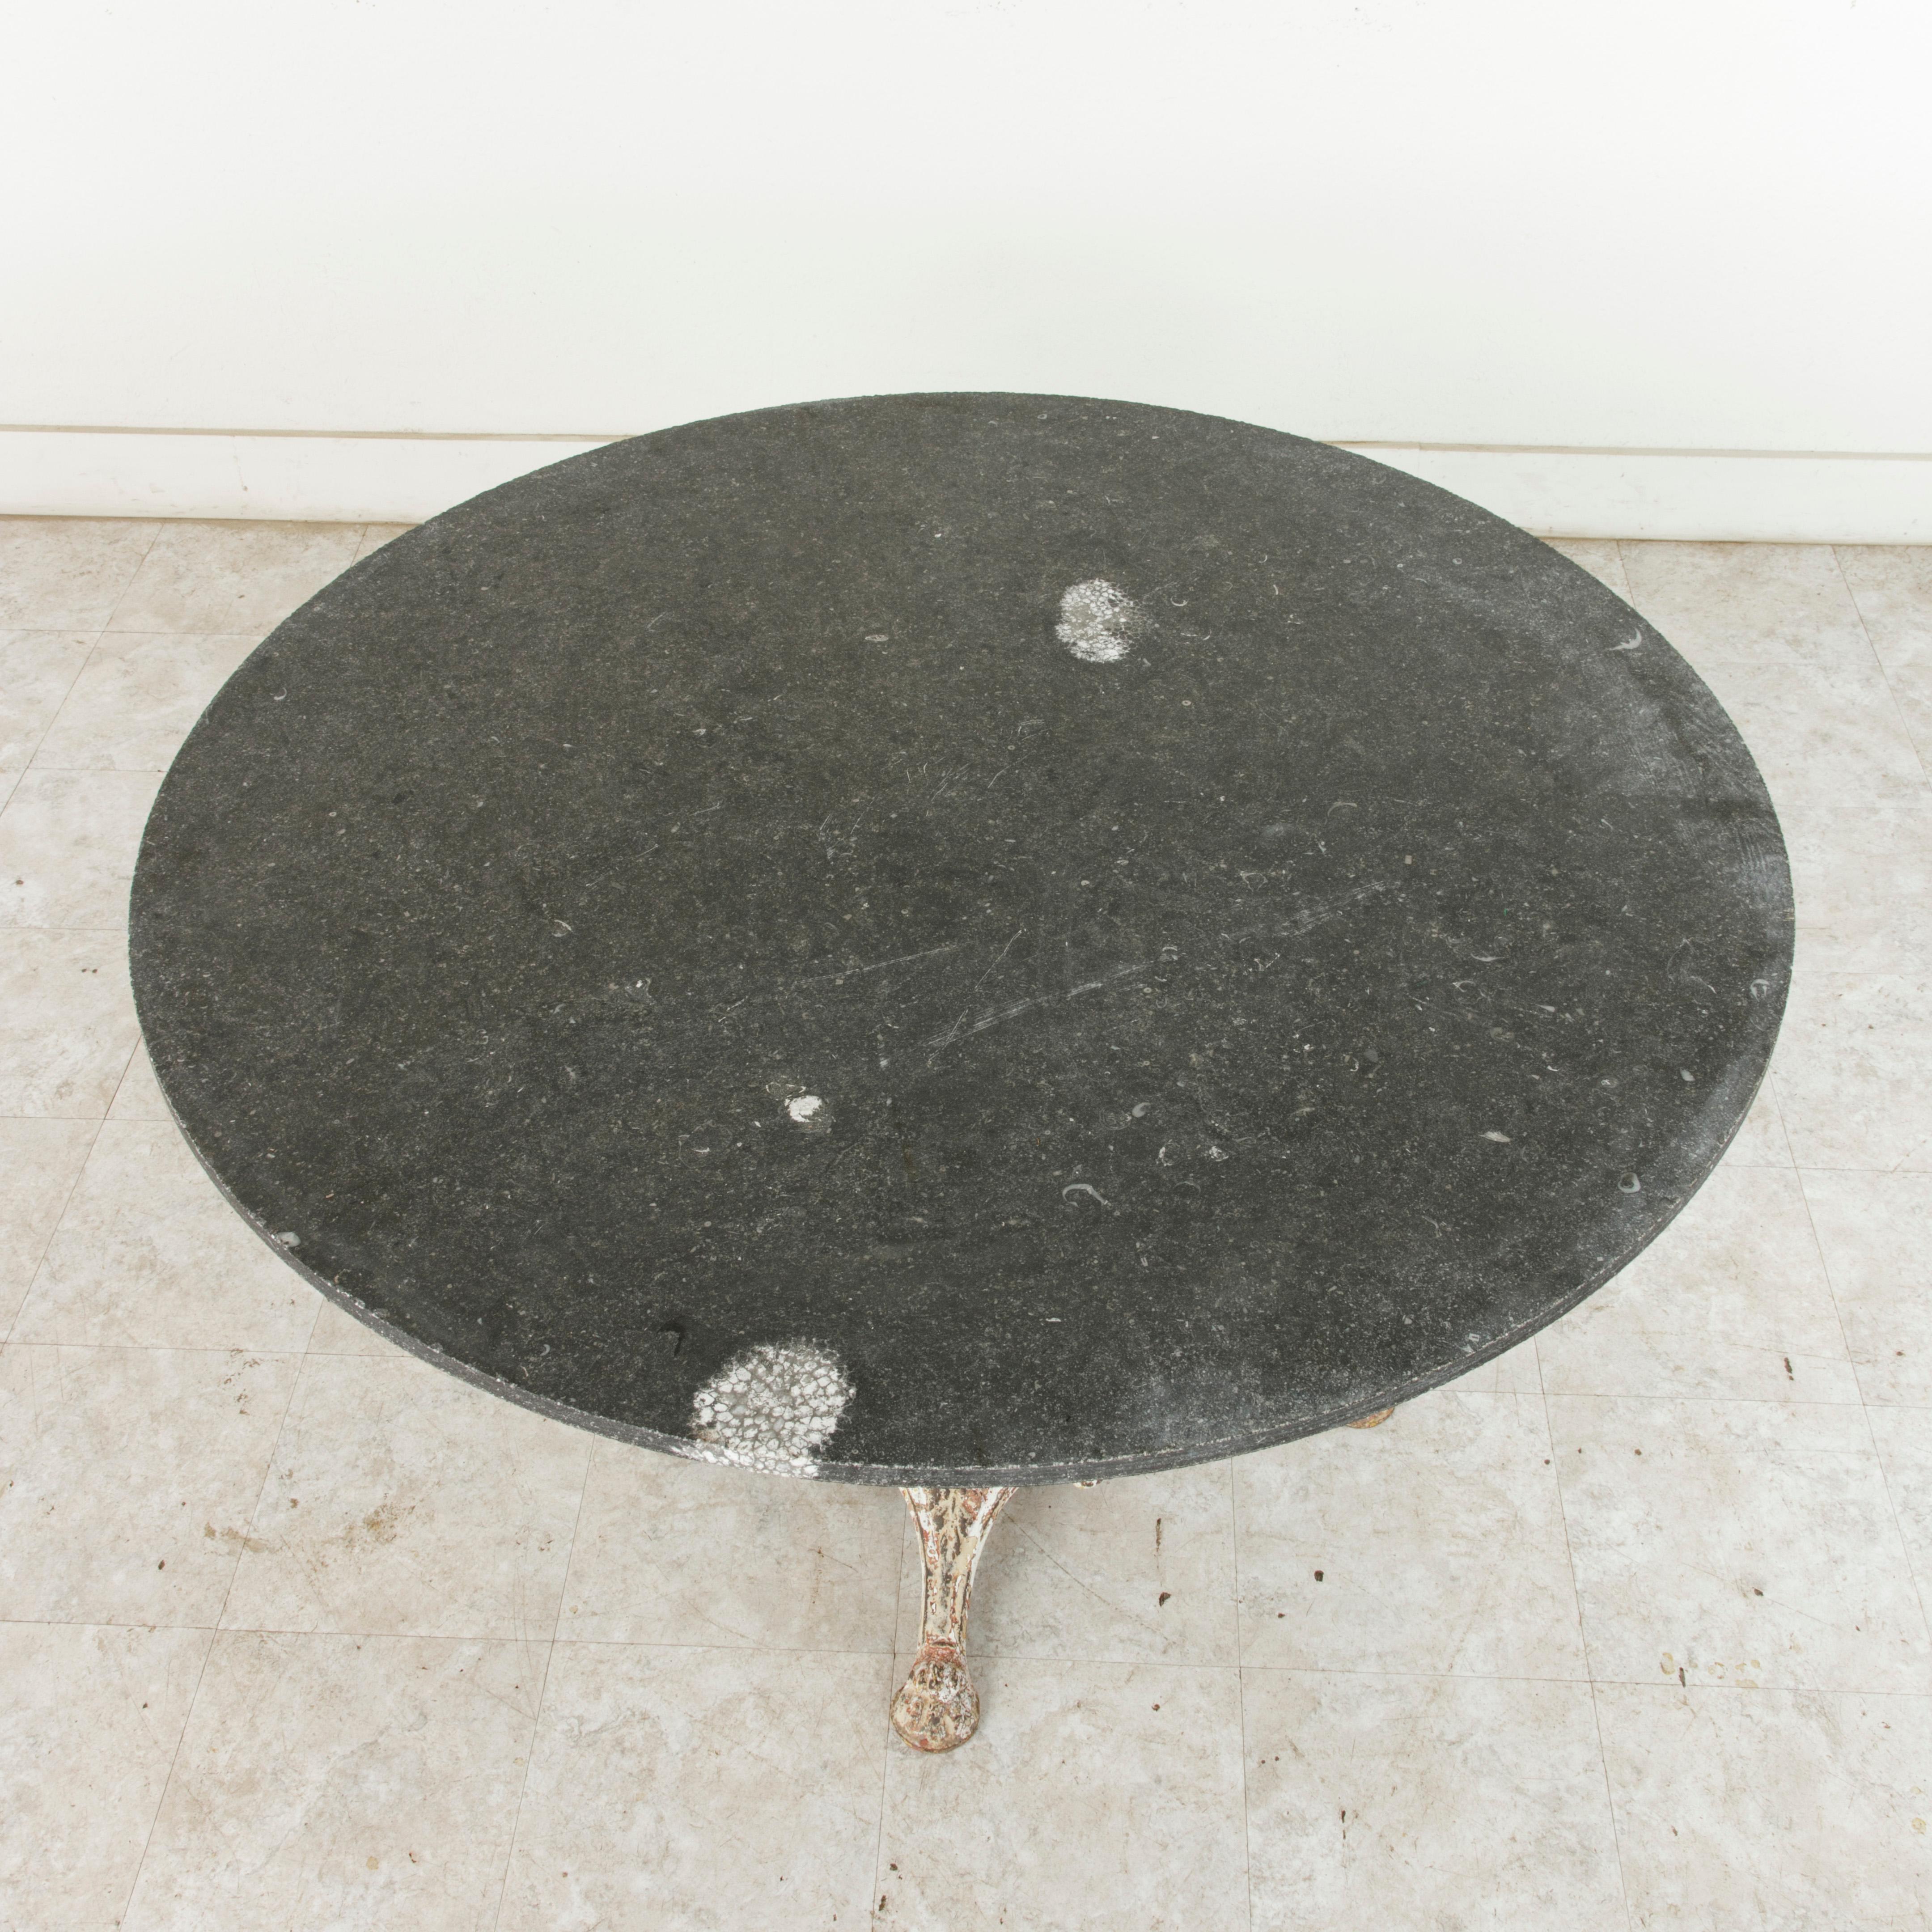 Large French Iron Garden Table with 49 Inch Diameter Blue Stone Top, circa 1900 1